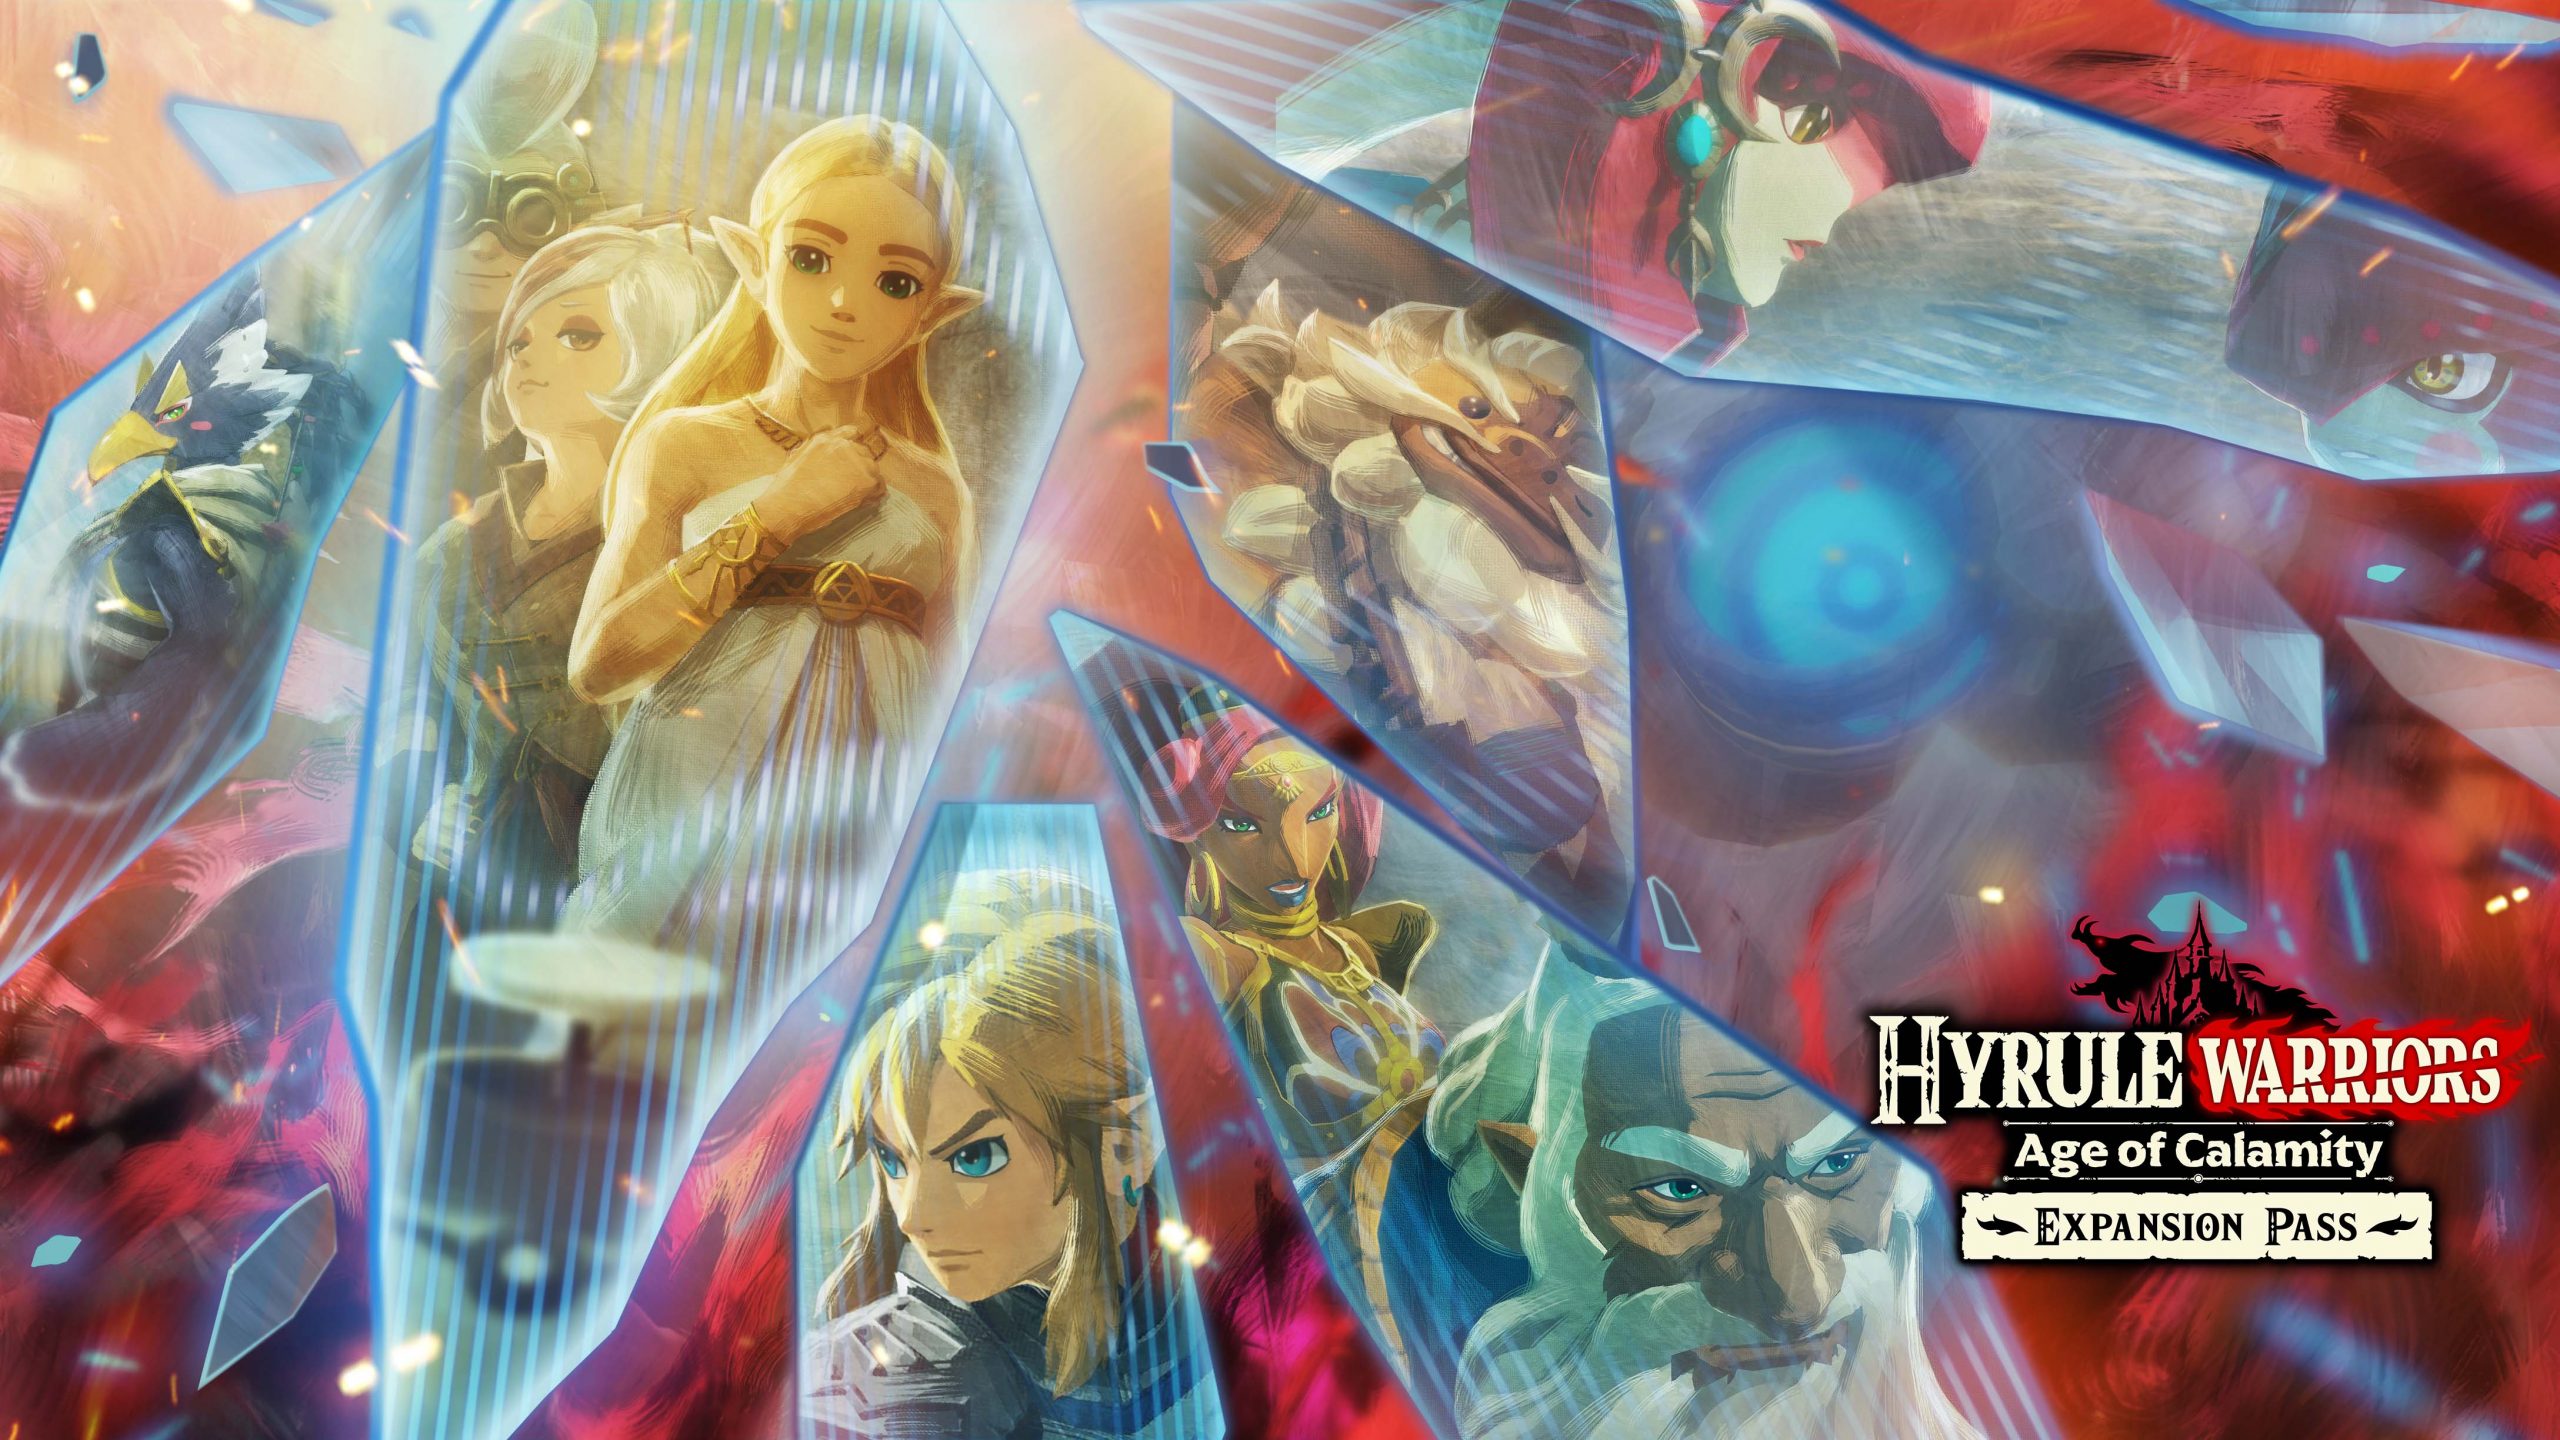 Classic Zelda locations found in Hyrule Warriors: Age of Calamity